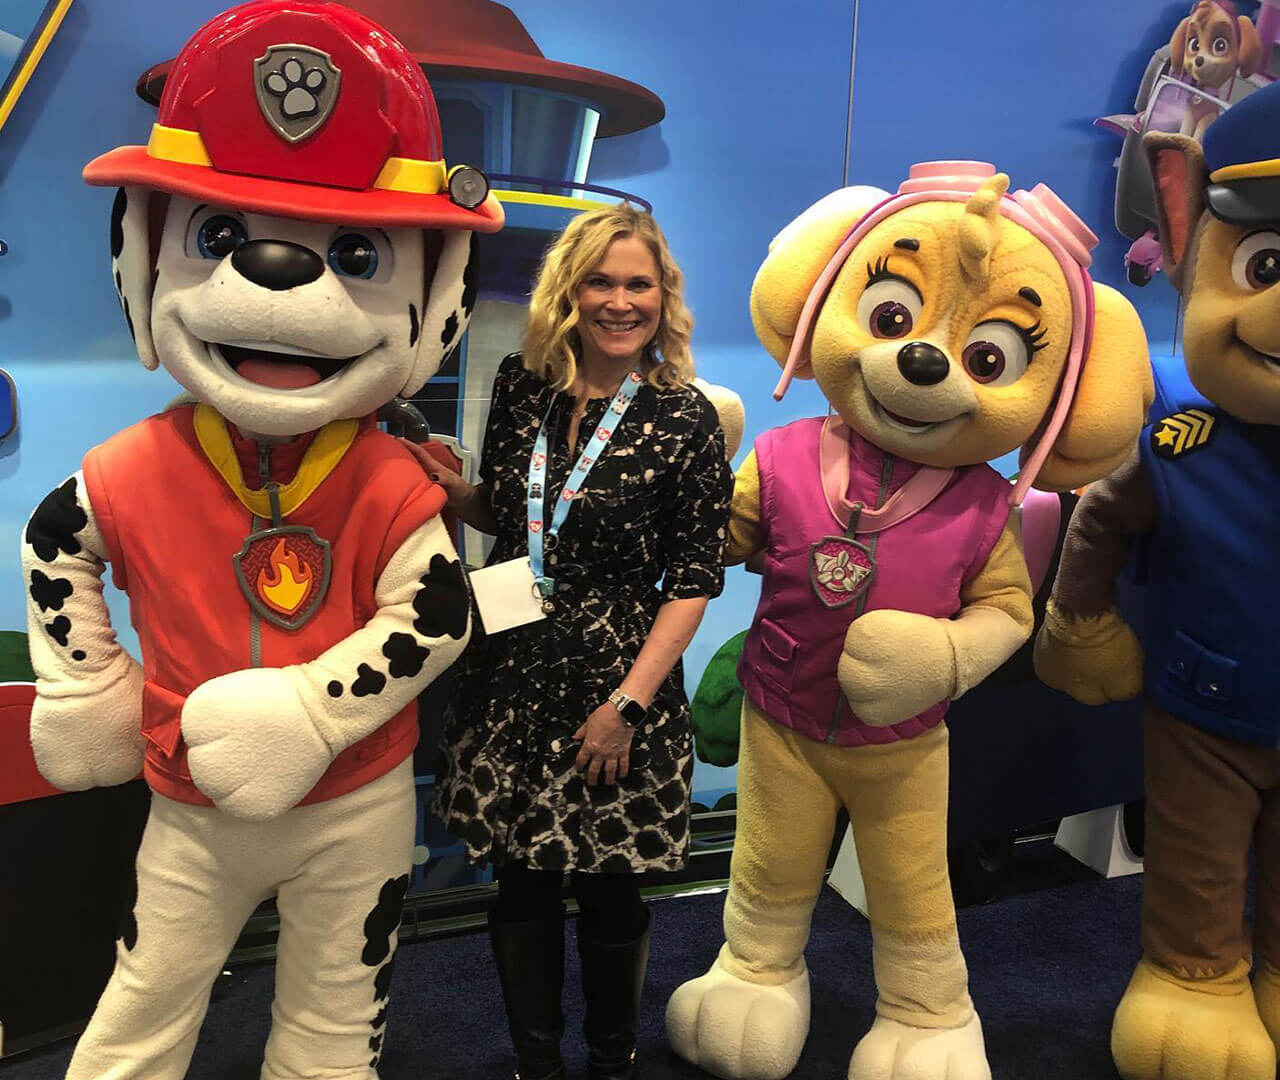 Filling the Toy Fair Void